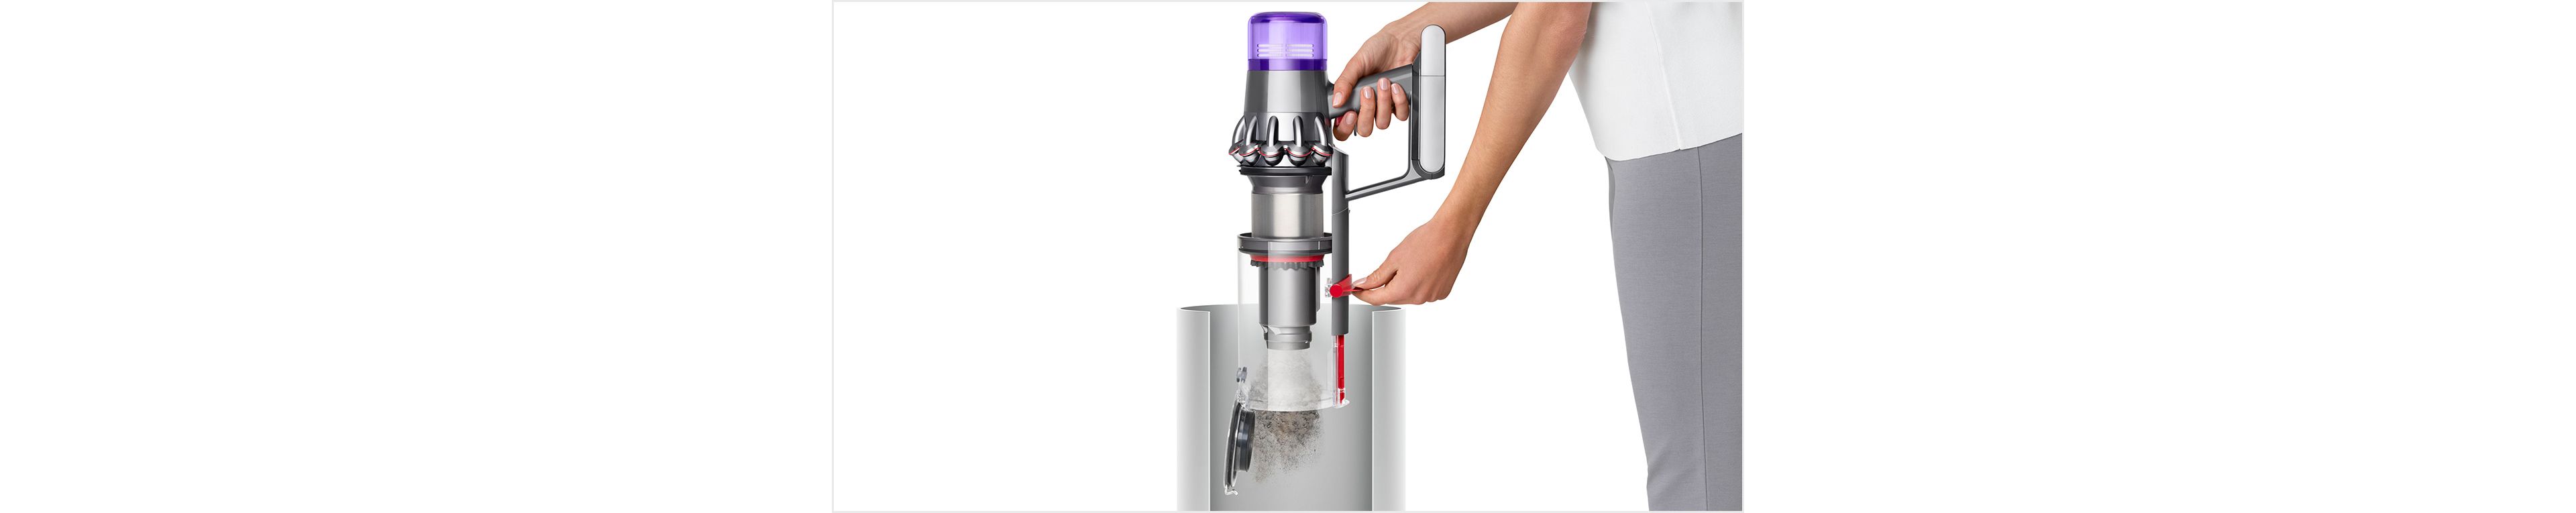 Dyson V11 vacuum cleaner being emptied into a bin